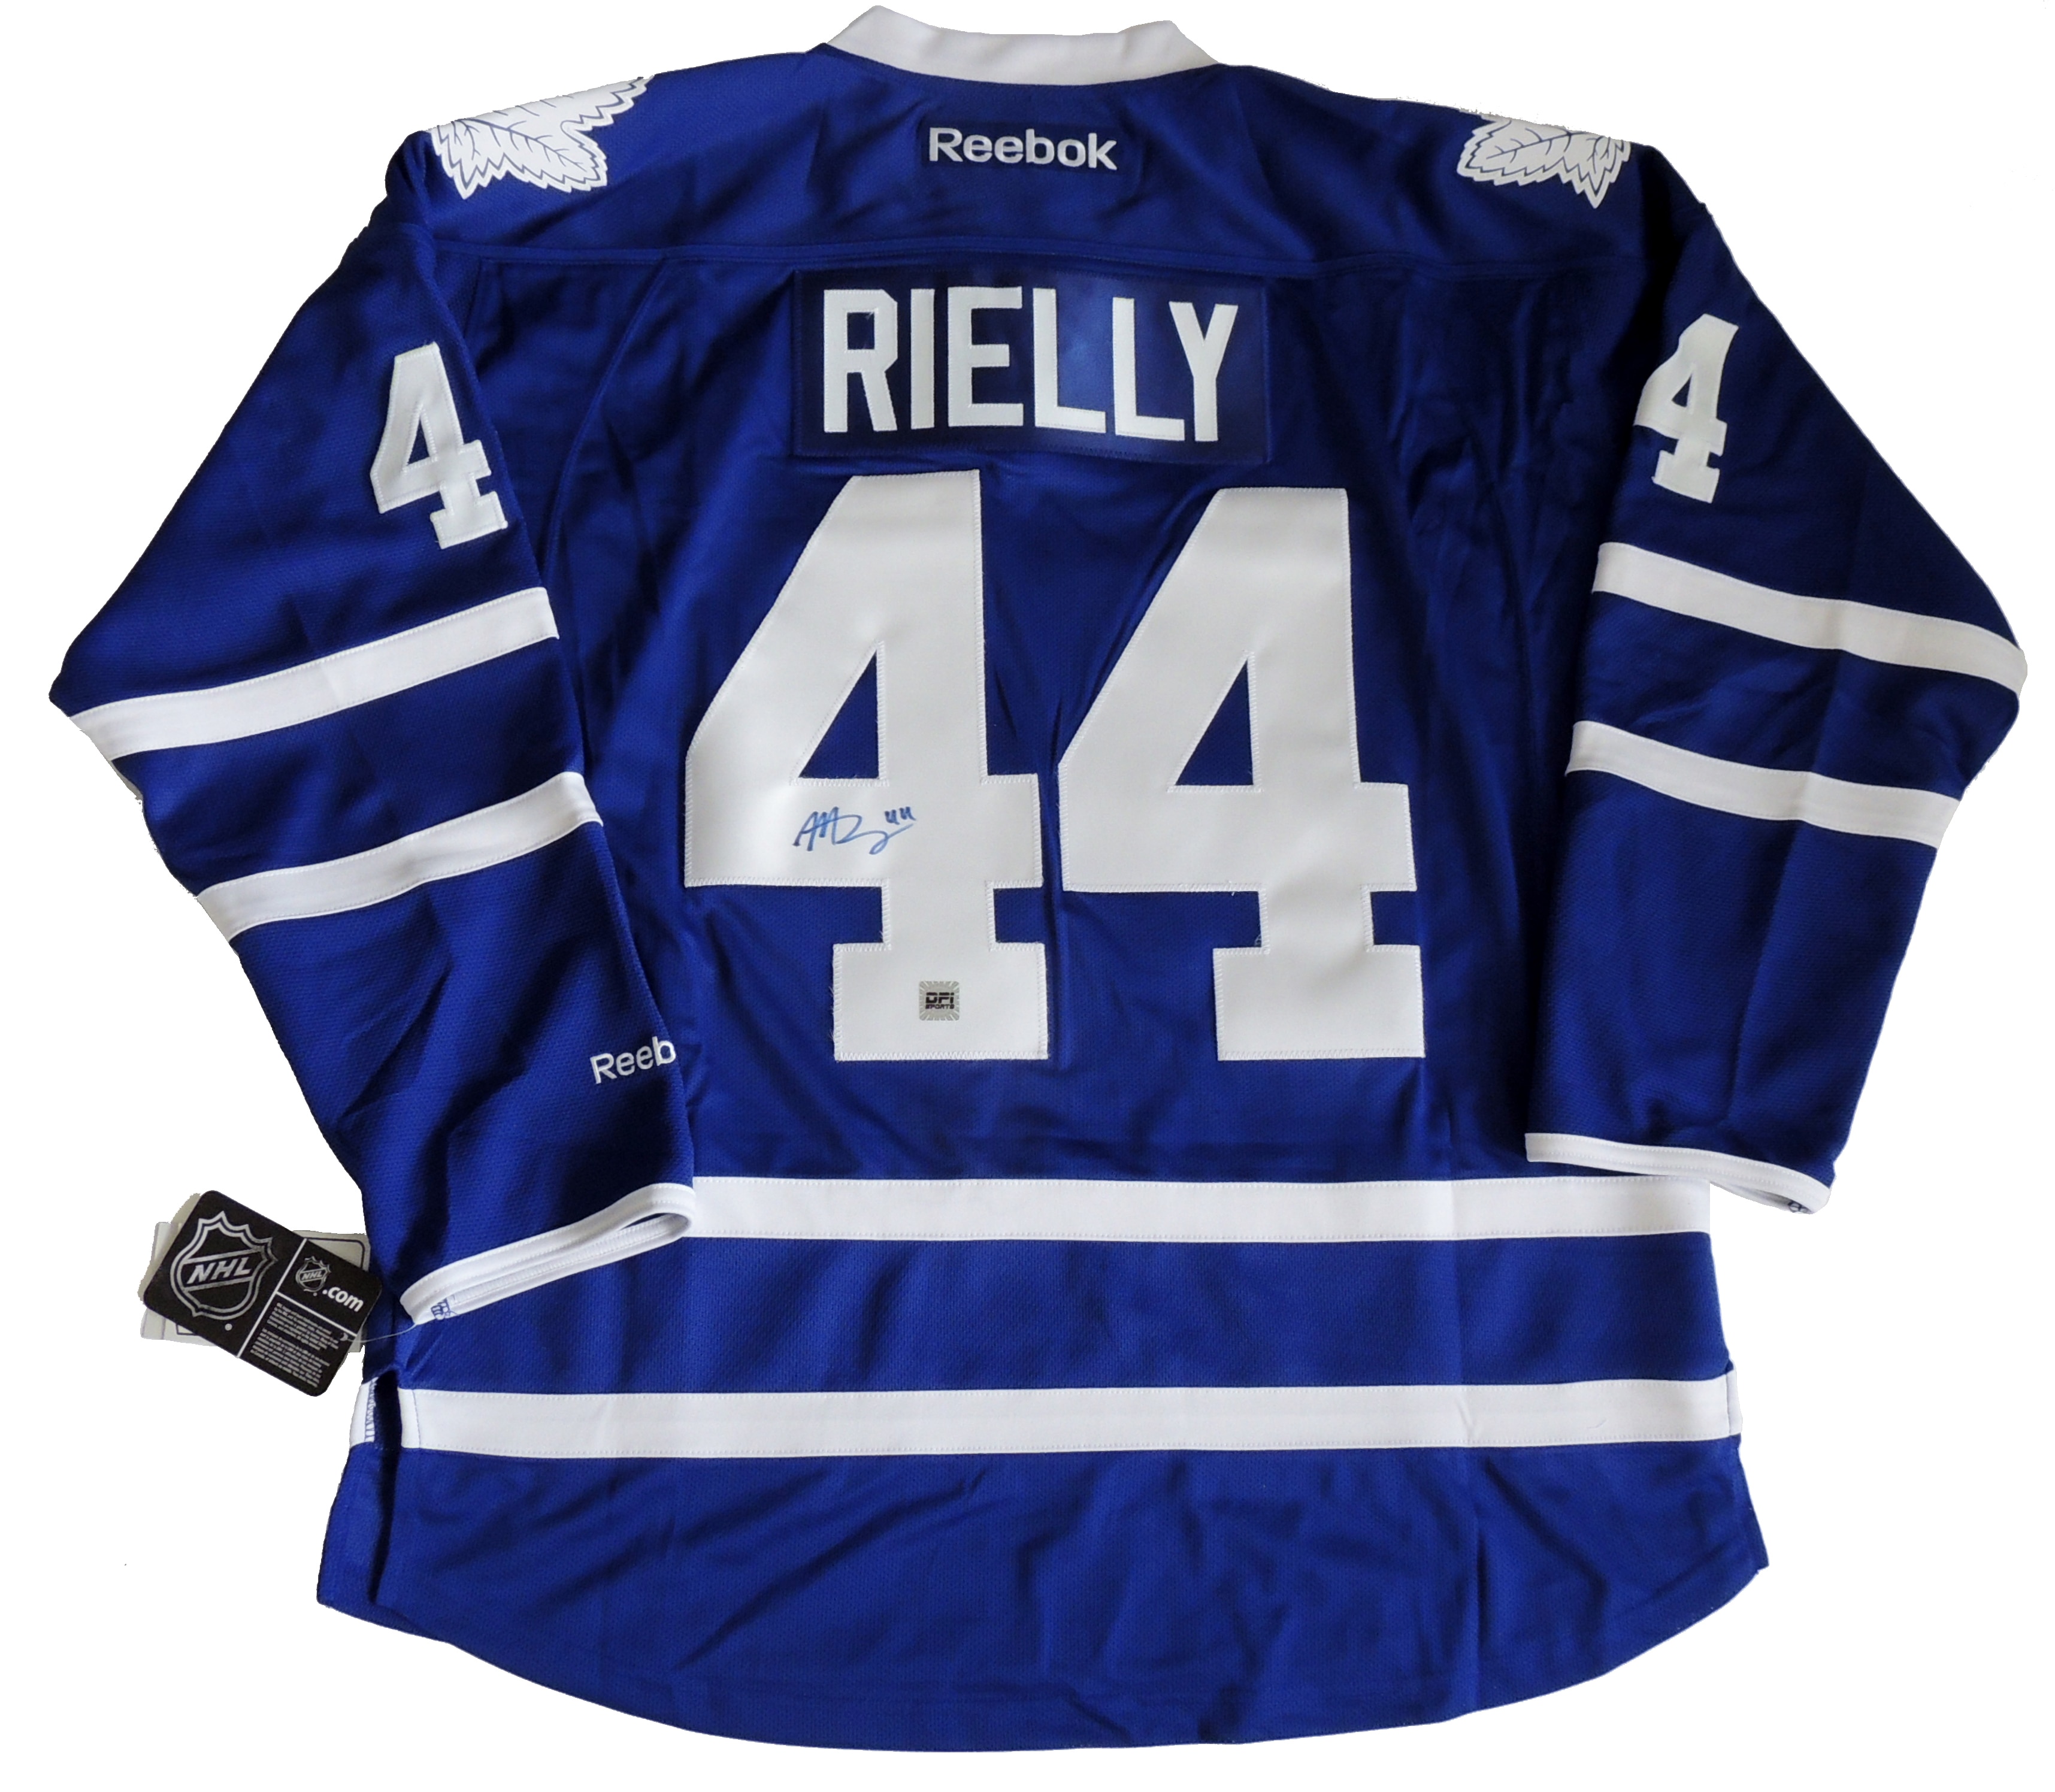 morgan rielly autographed jersey